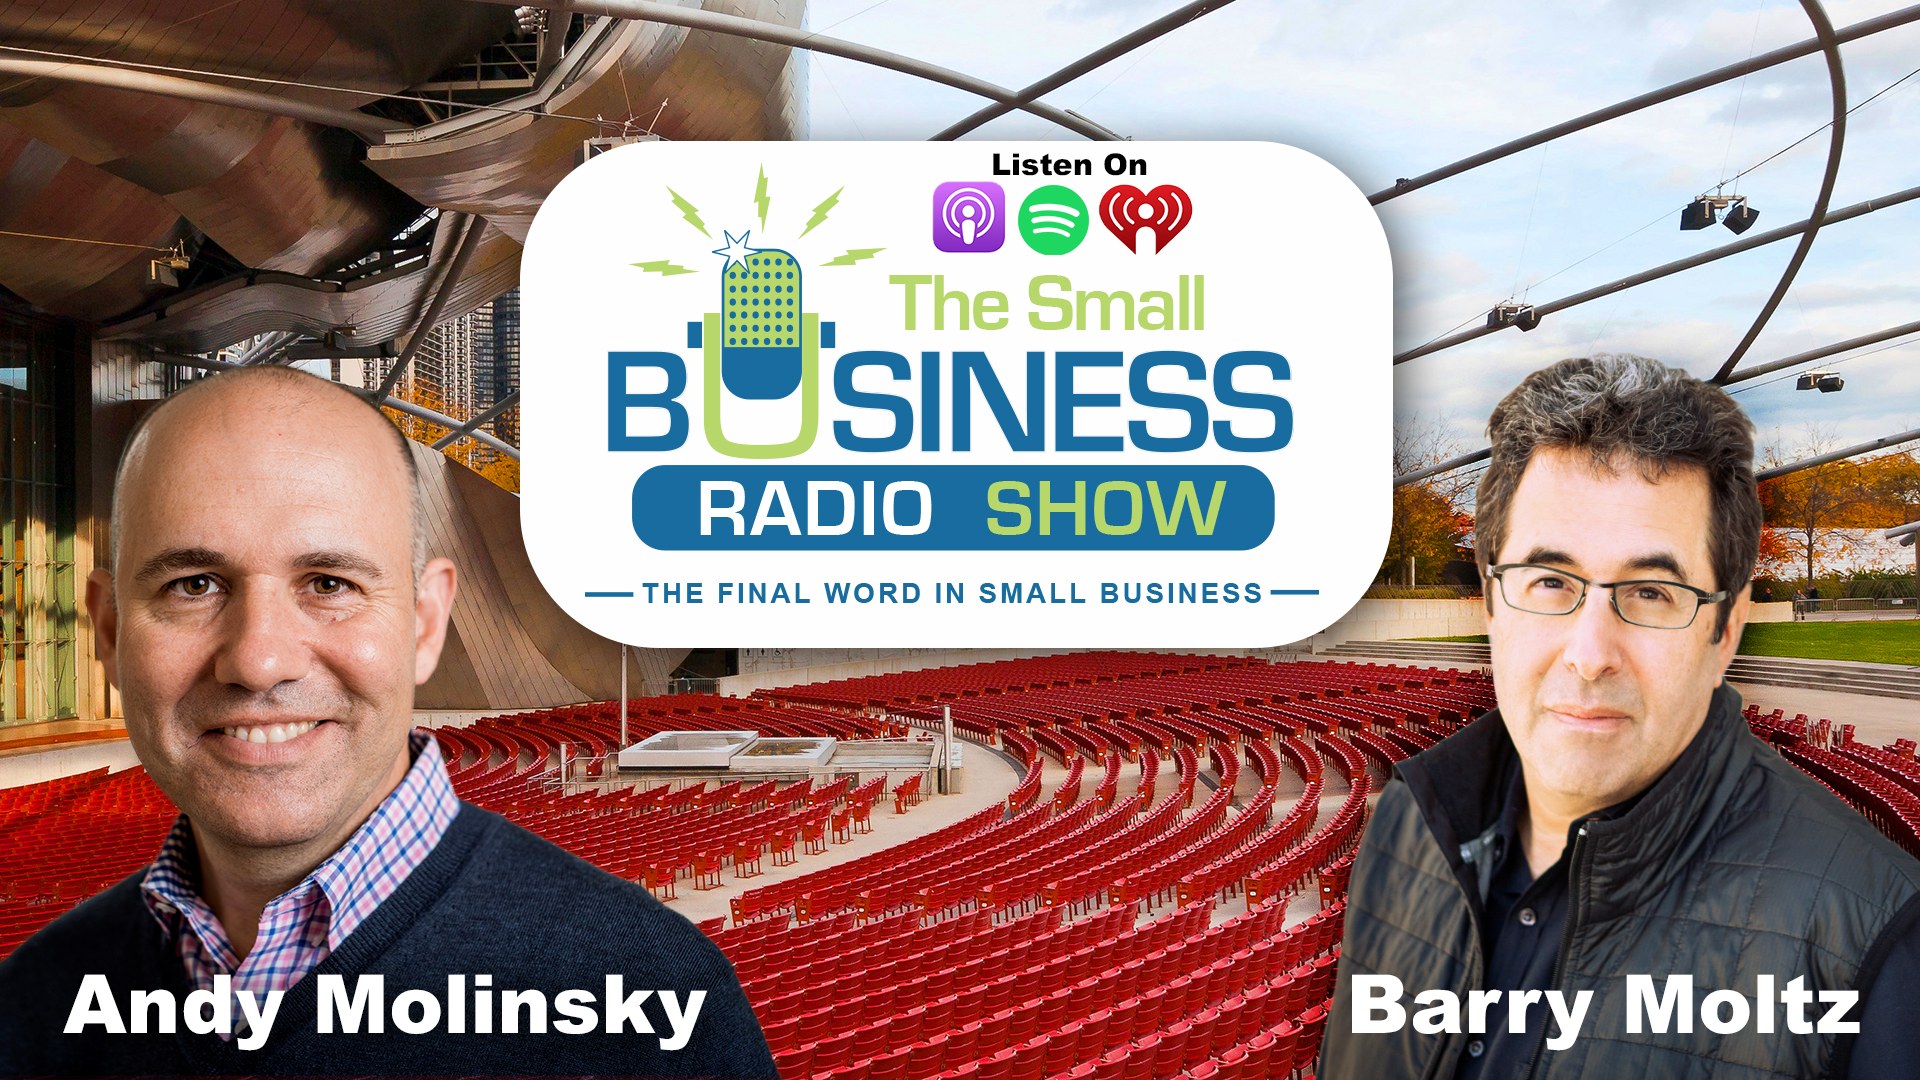 Andy Molinsky on The Small Business Radio Show